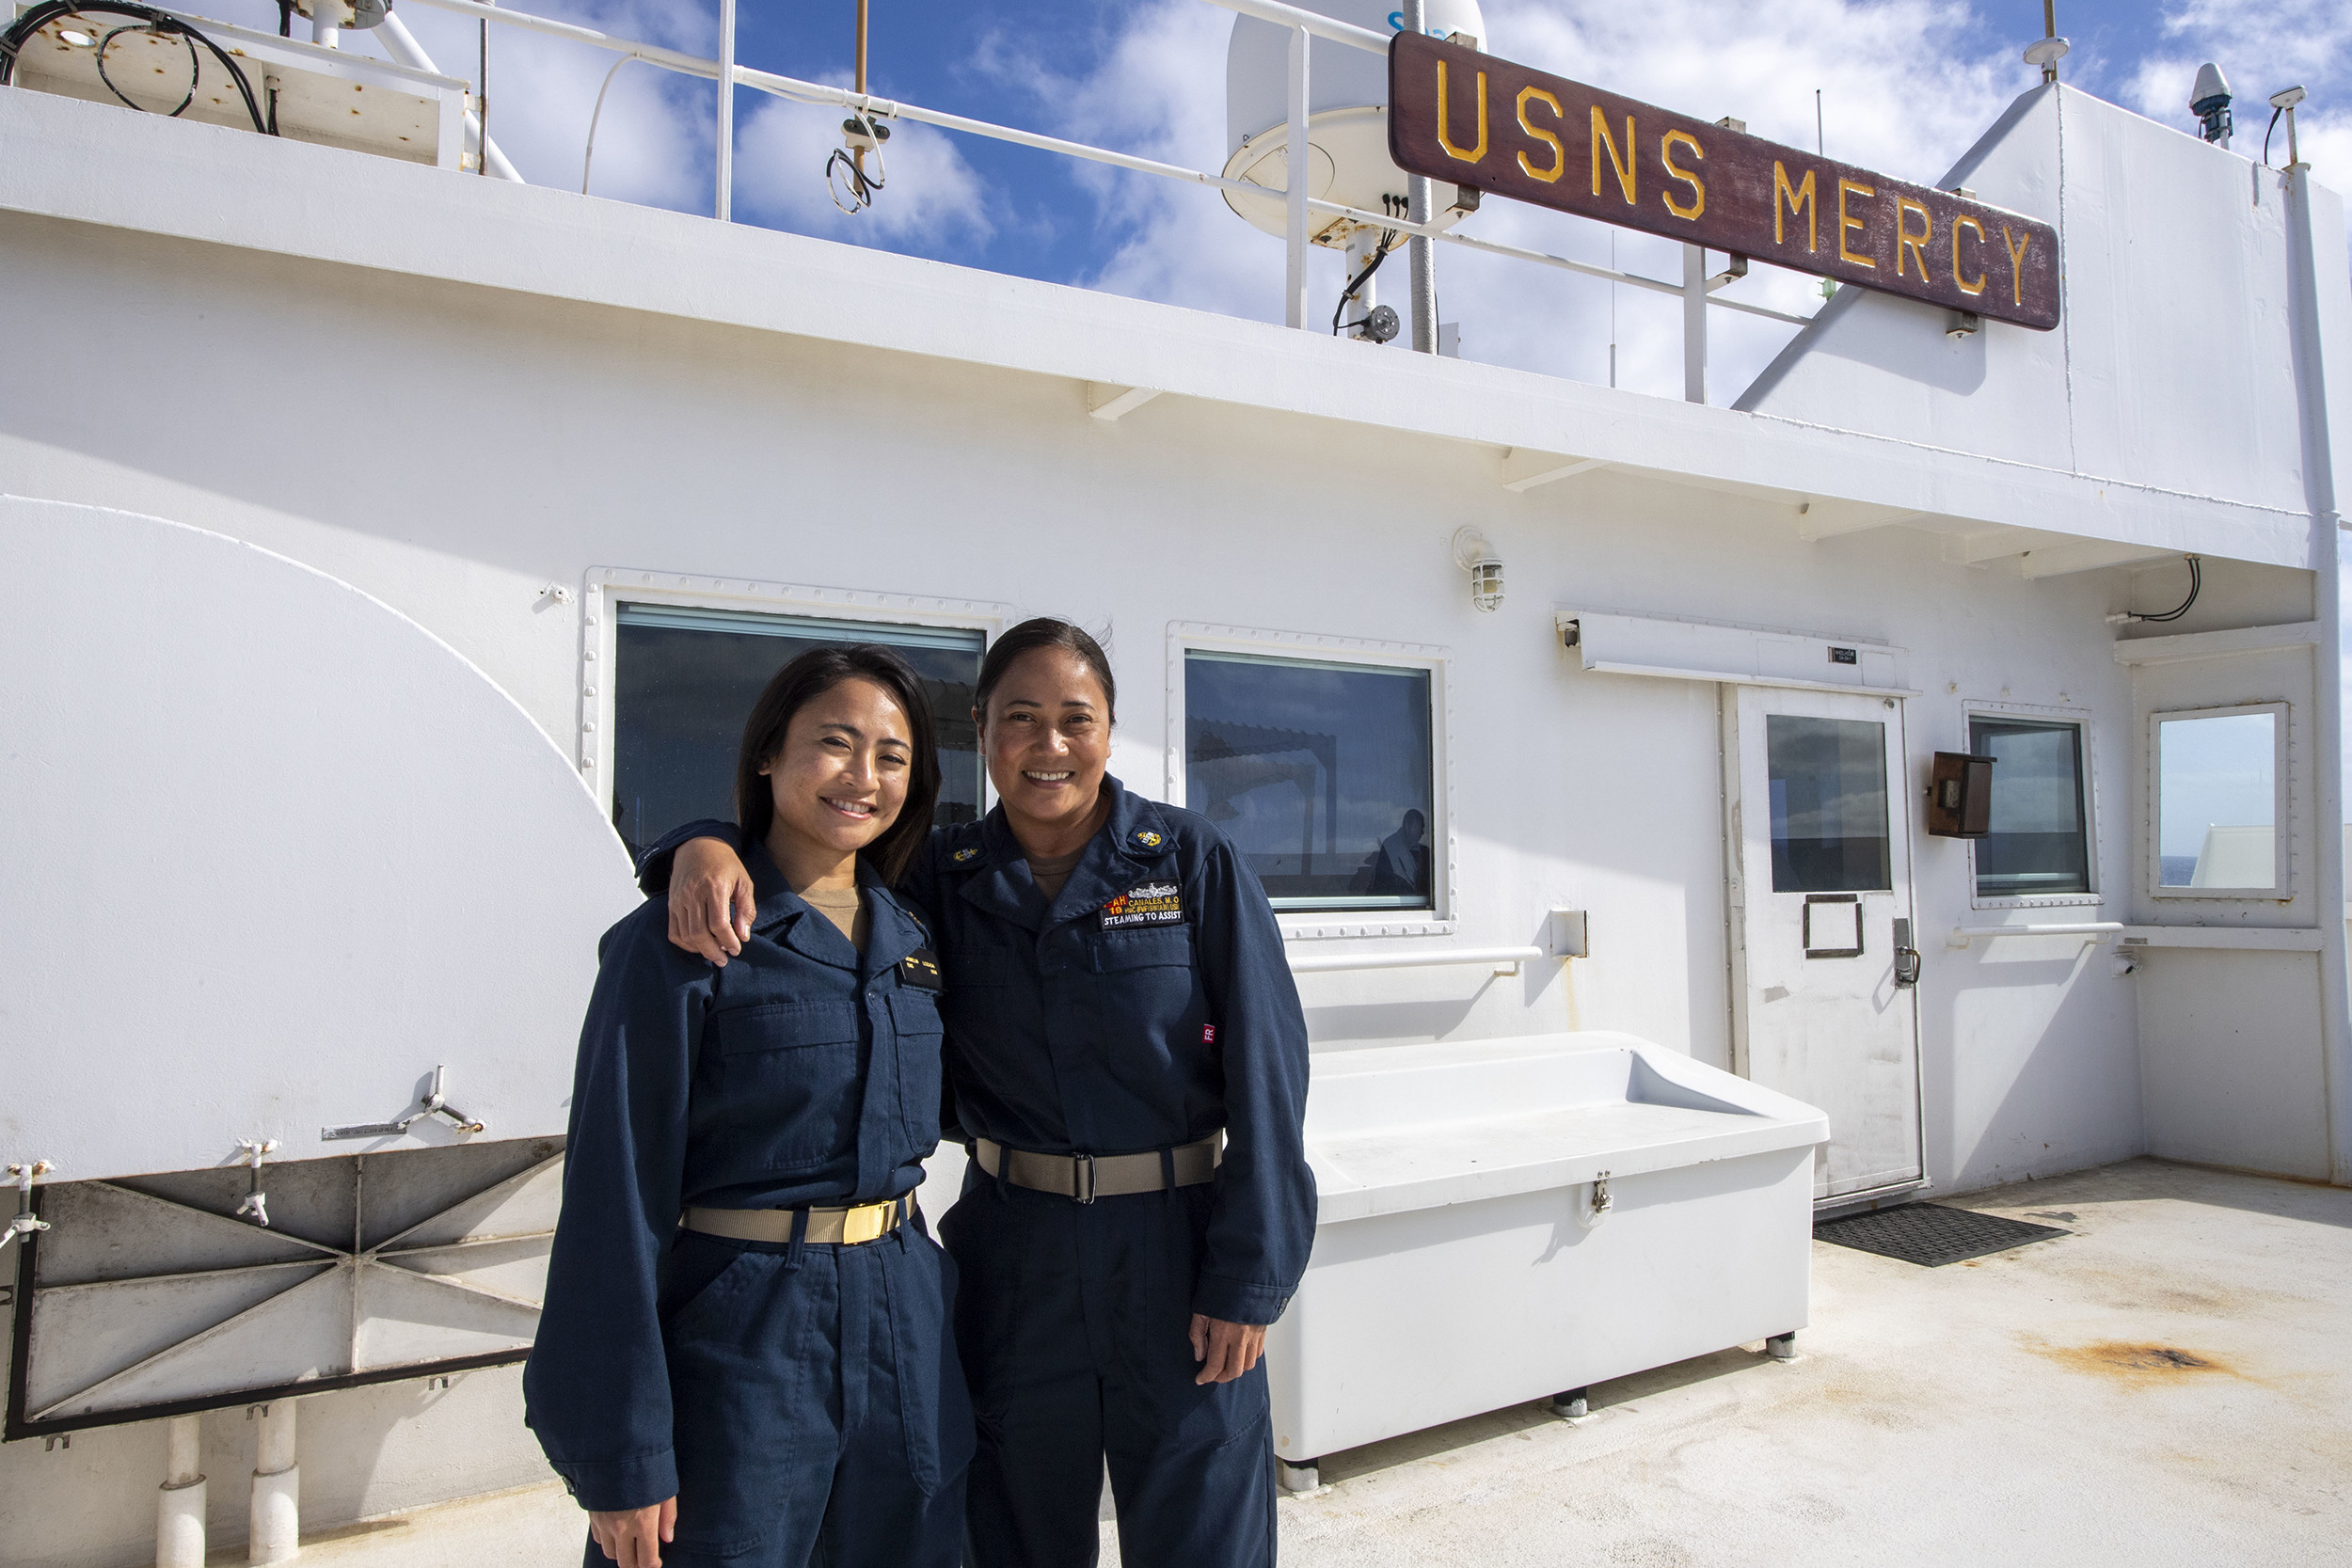 Mother, daughter spend Mother’s Day on mission aboard U.S. hospital ship